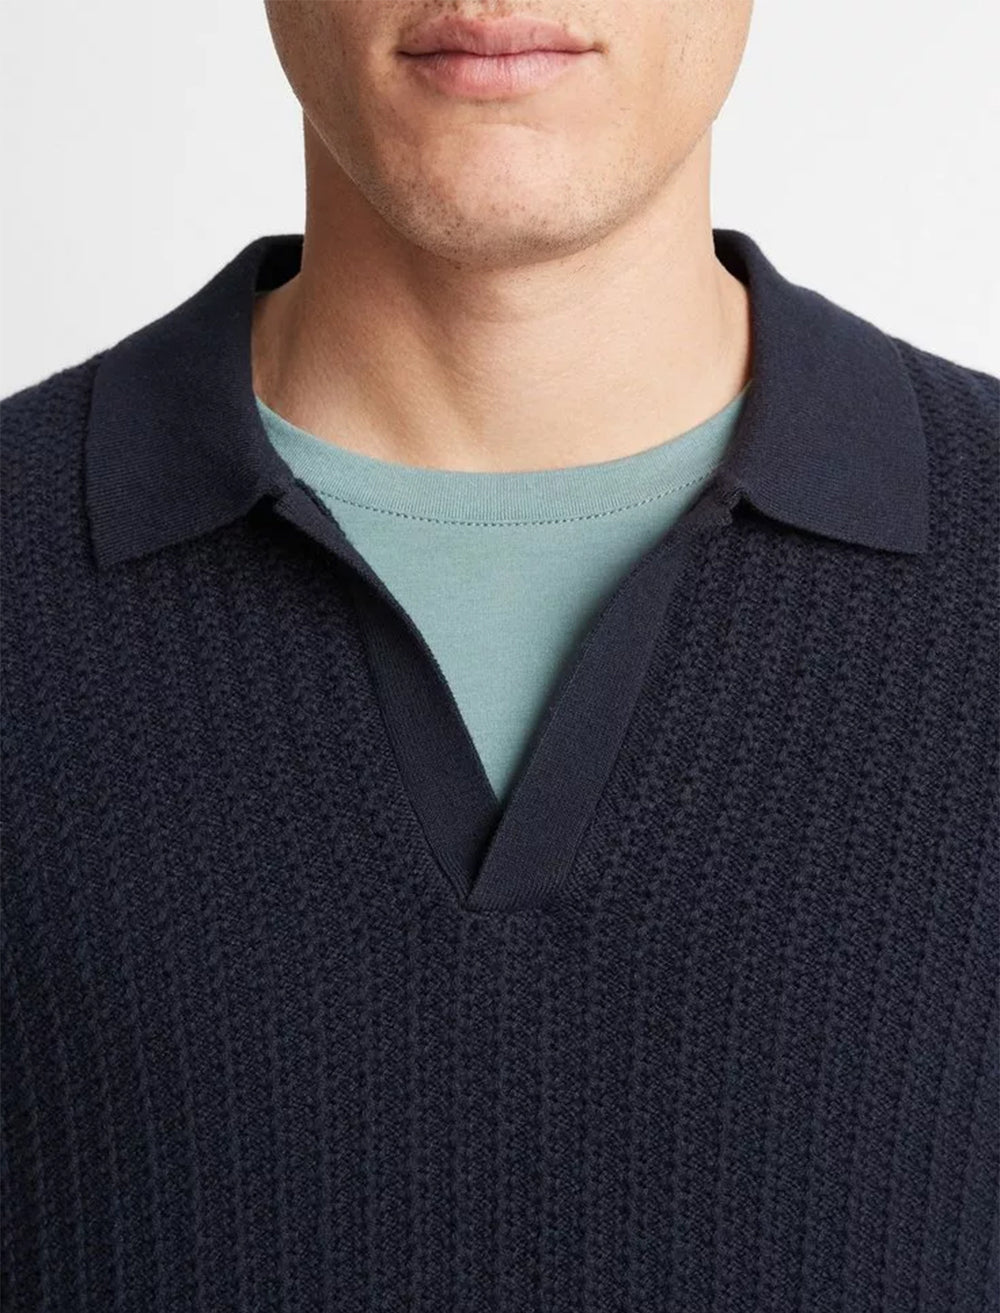 mens crafted rib s/s johnny collar sweater in coastal (2)